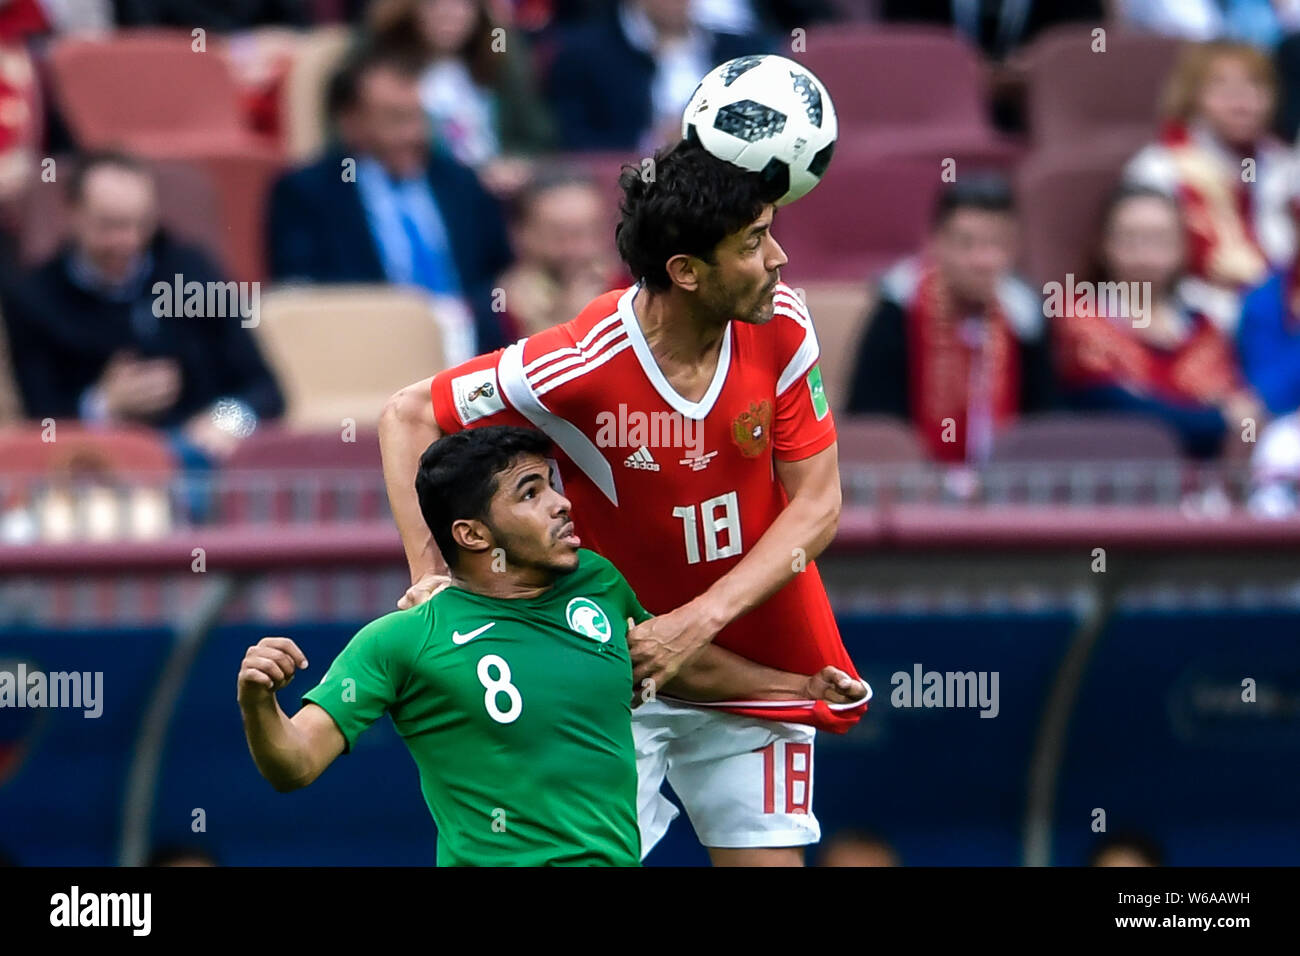 Yuri Zhirkov of Russia, right, heads the ball against Yahya Al-Shehri of Saudi Arabia in their Group A match during the 2018 FIFA World Cup in Moscow, Stock Photo